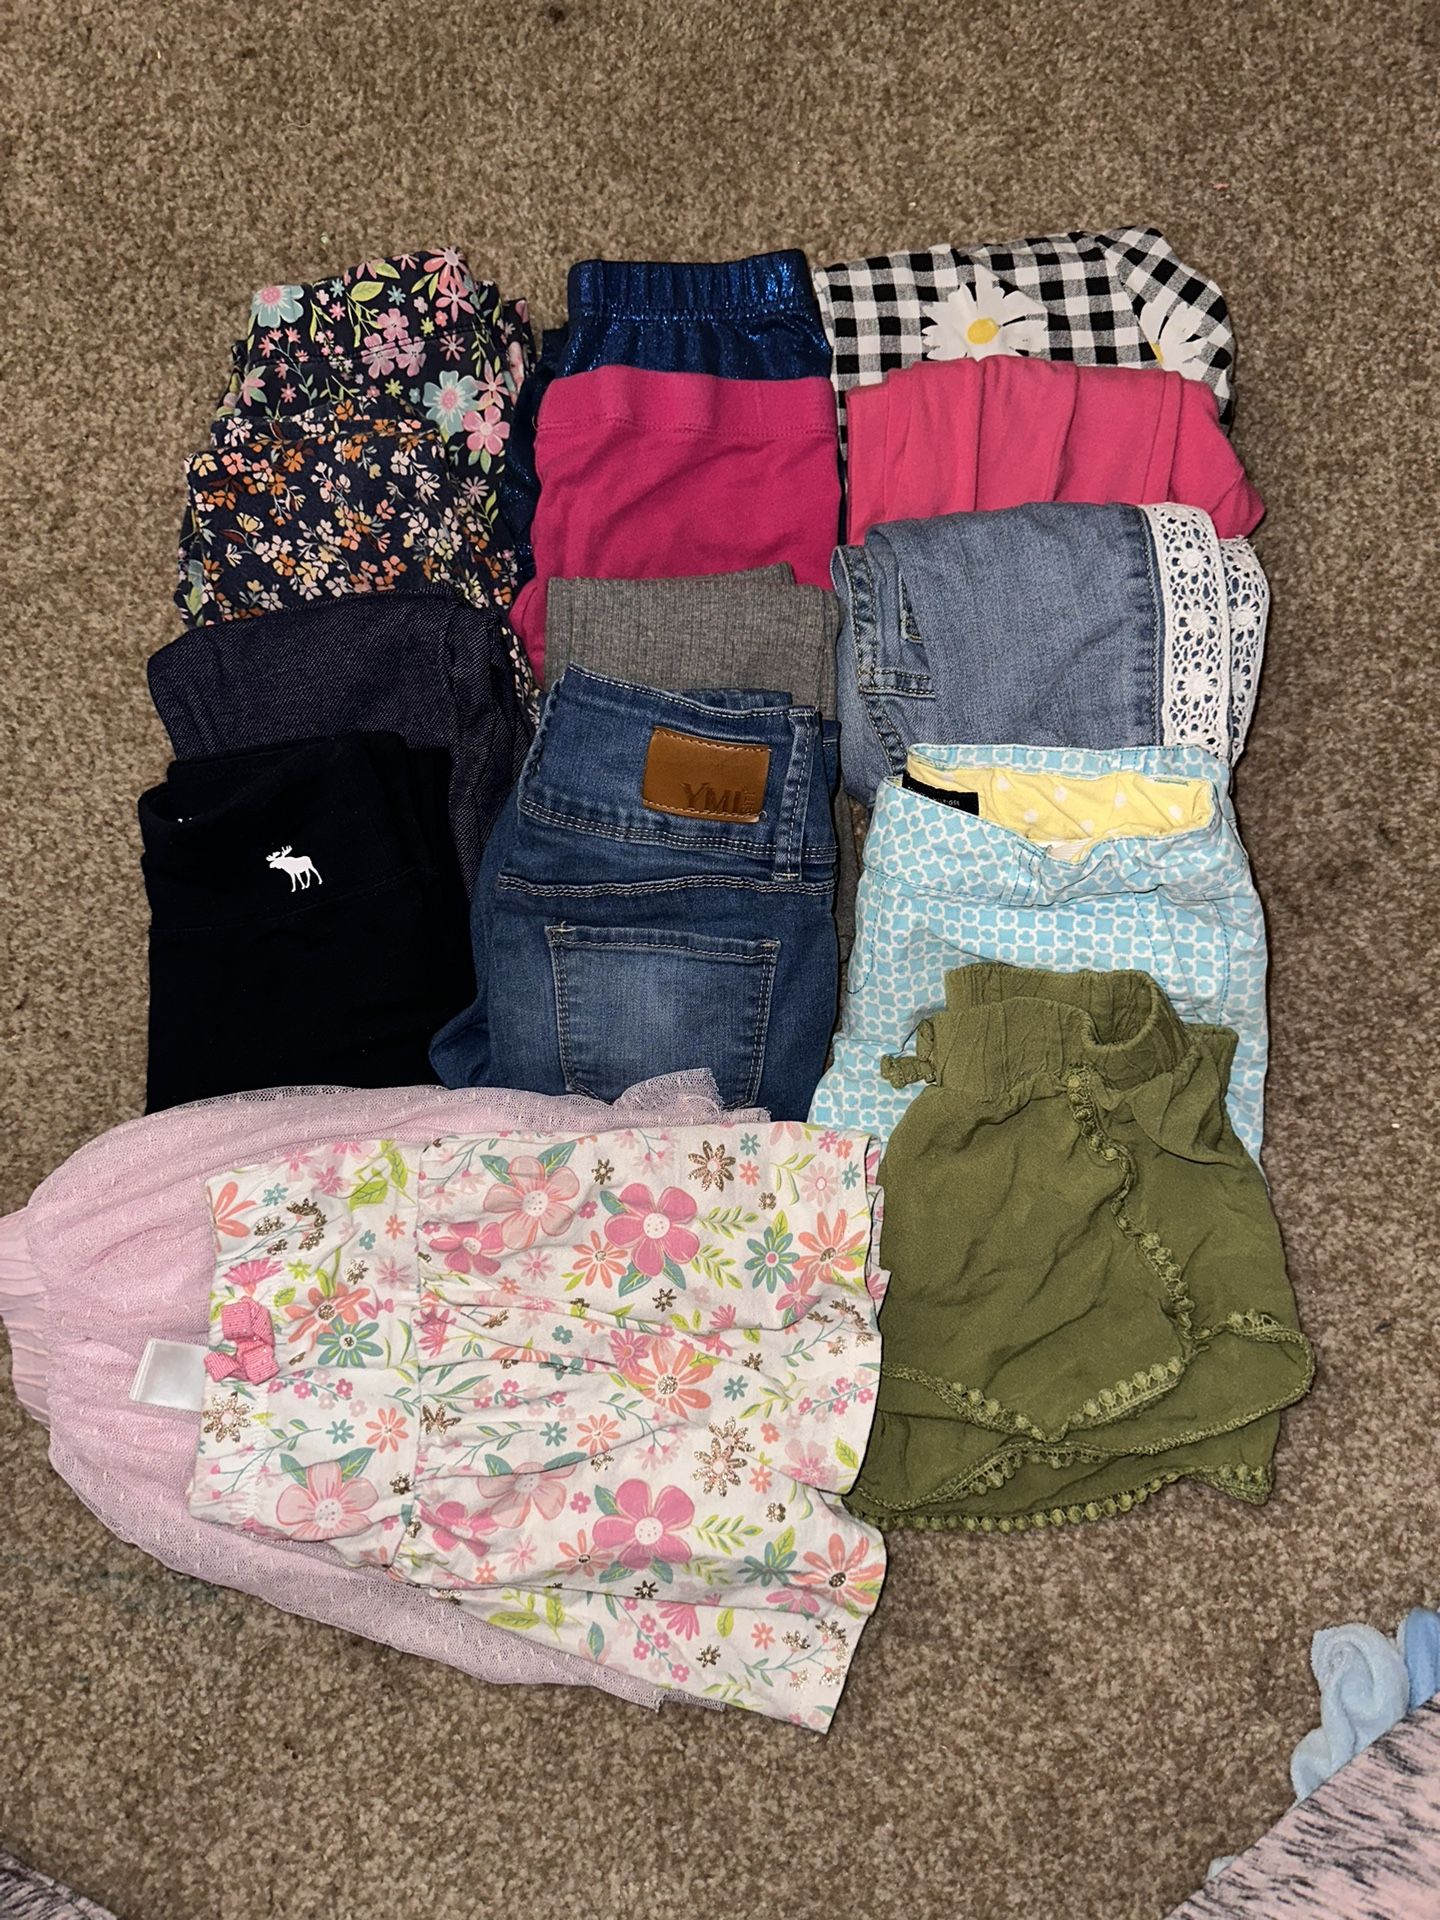 Girl’s Clothing Lot Size 7/8